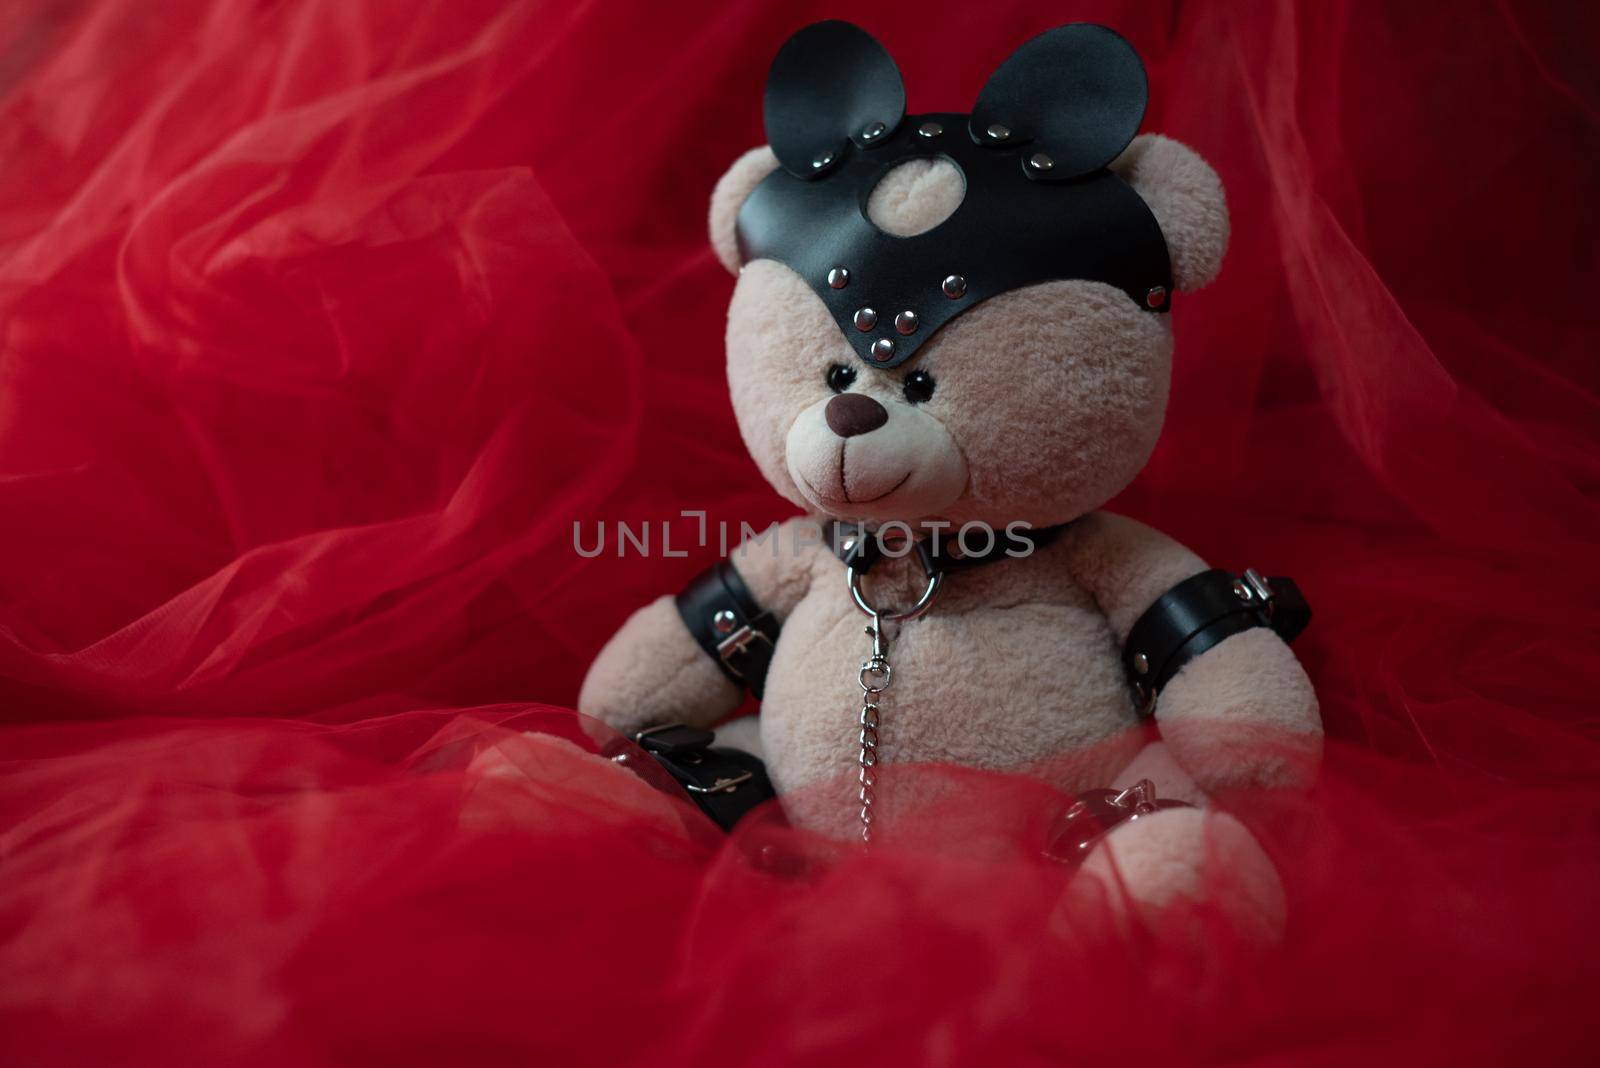 a toy teddy bear dressed in leather belts and a mask, an accessory for BDSM games against a beautiful red fabric by Rotozey